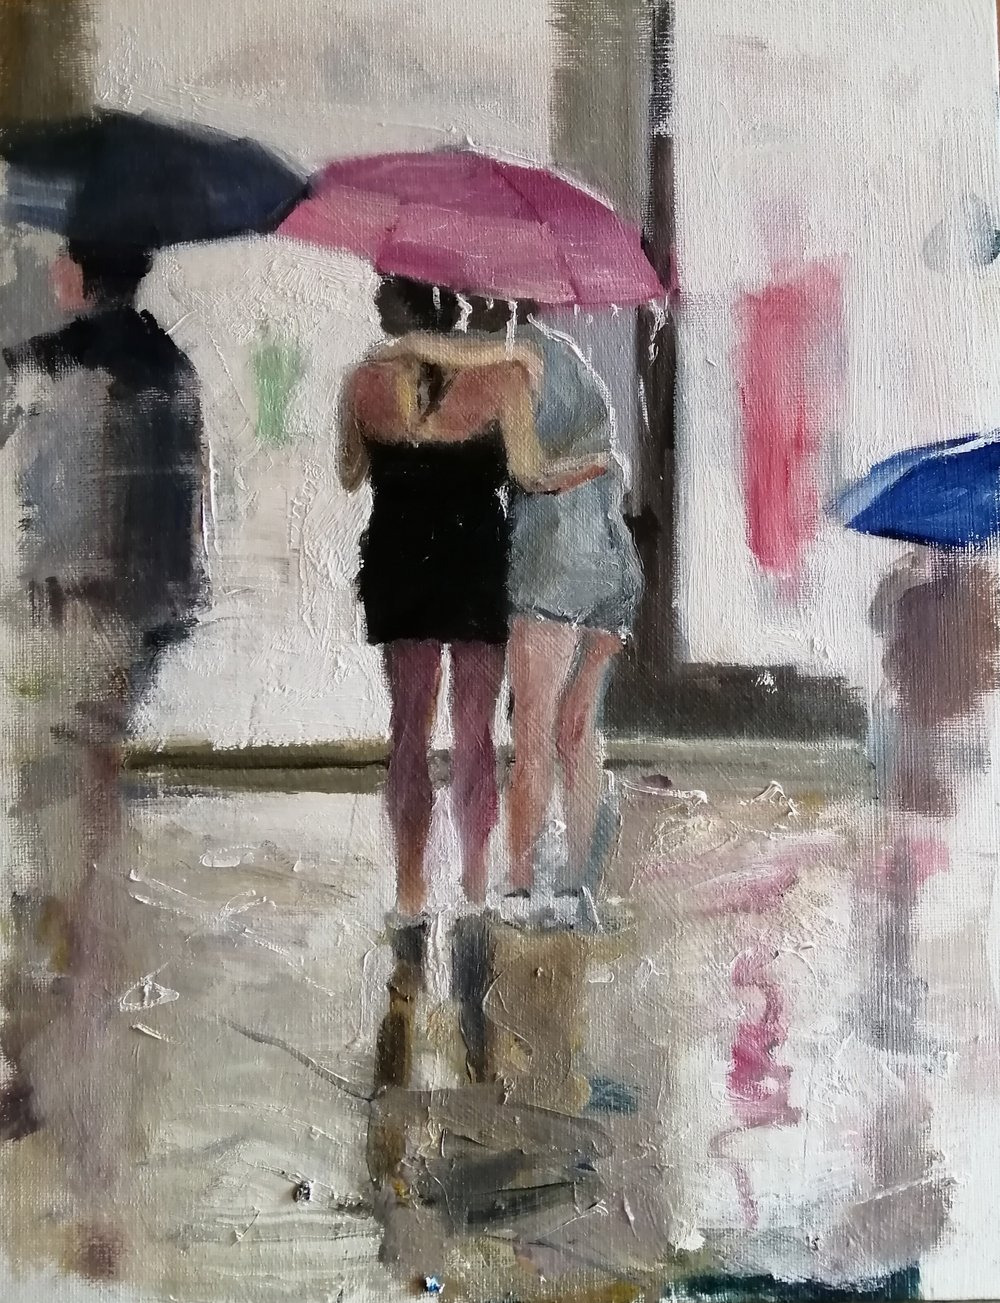  Umbrellas  Oil on board  26x31cm  £400  An impressionist painting of two women caught in the rain, huddling under an umbrella. The back lighting from the shops and the semi abstract gestural treatment of the wet pavement add drama and colour to this